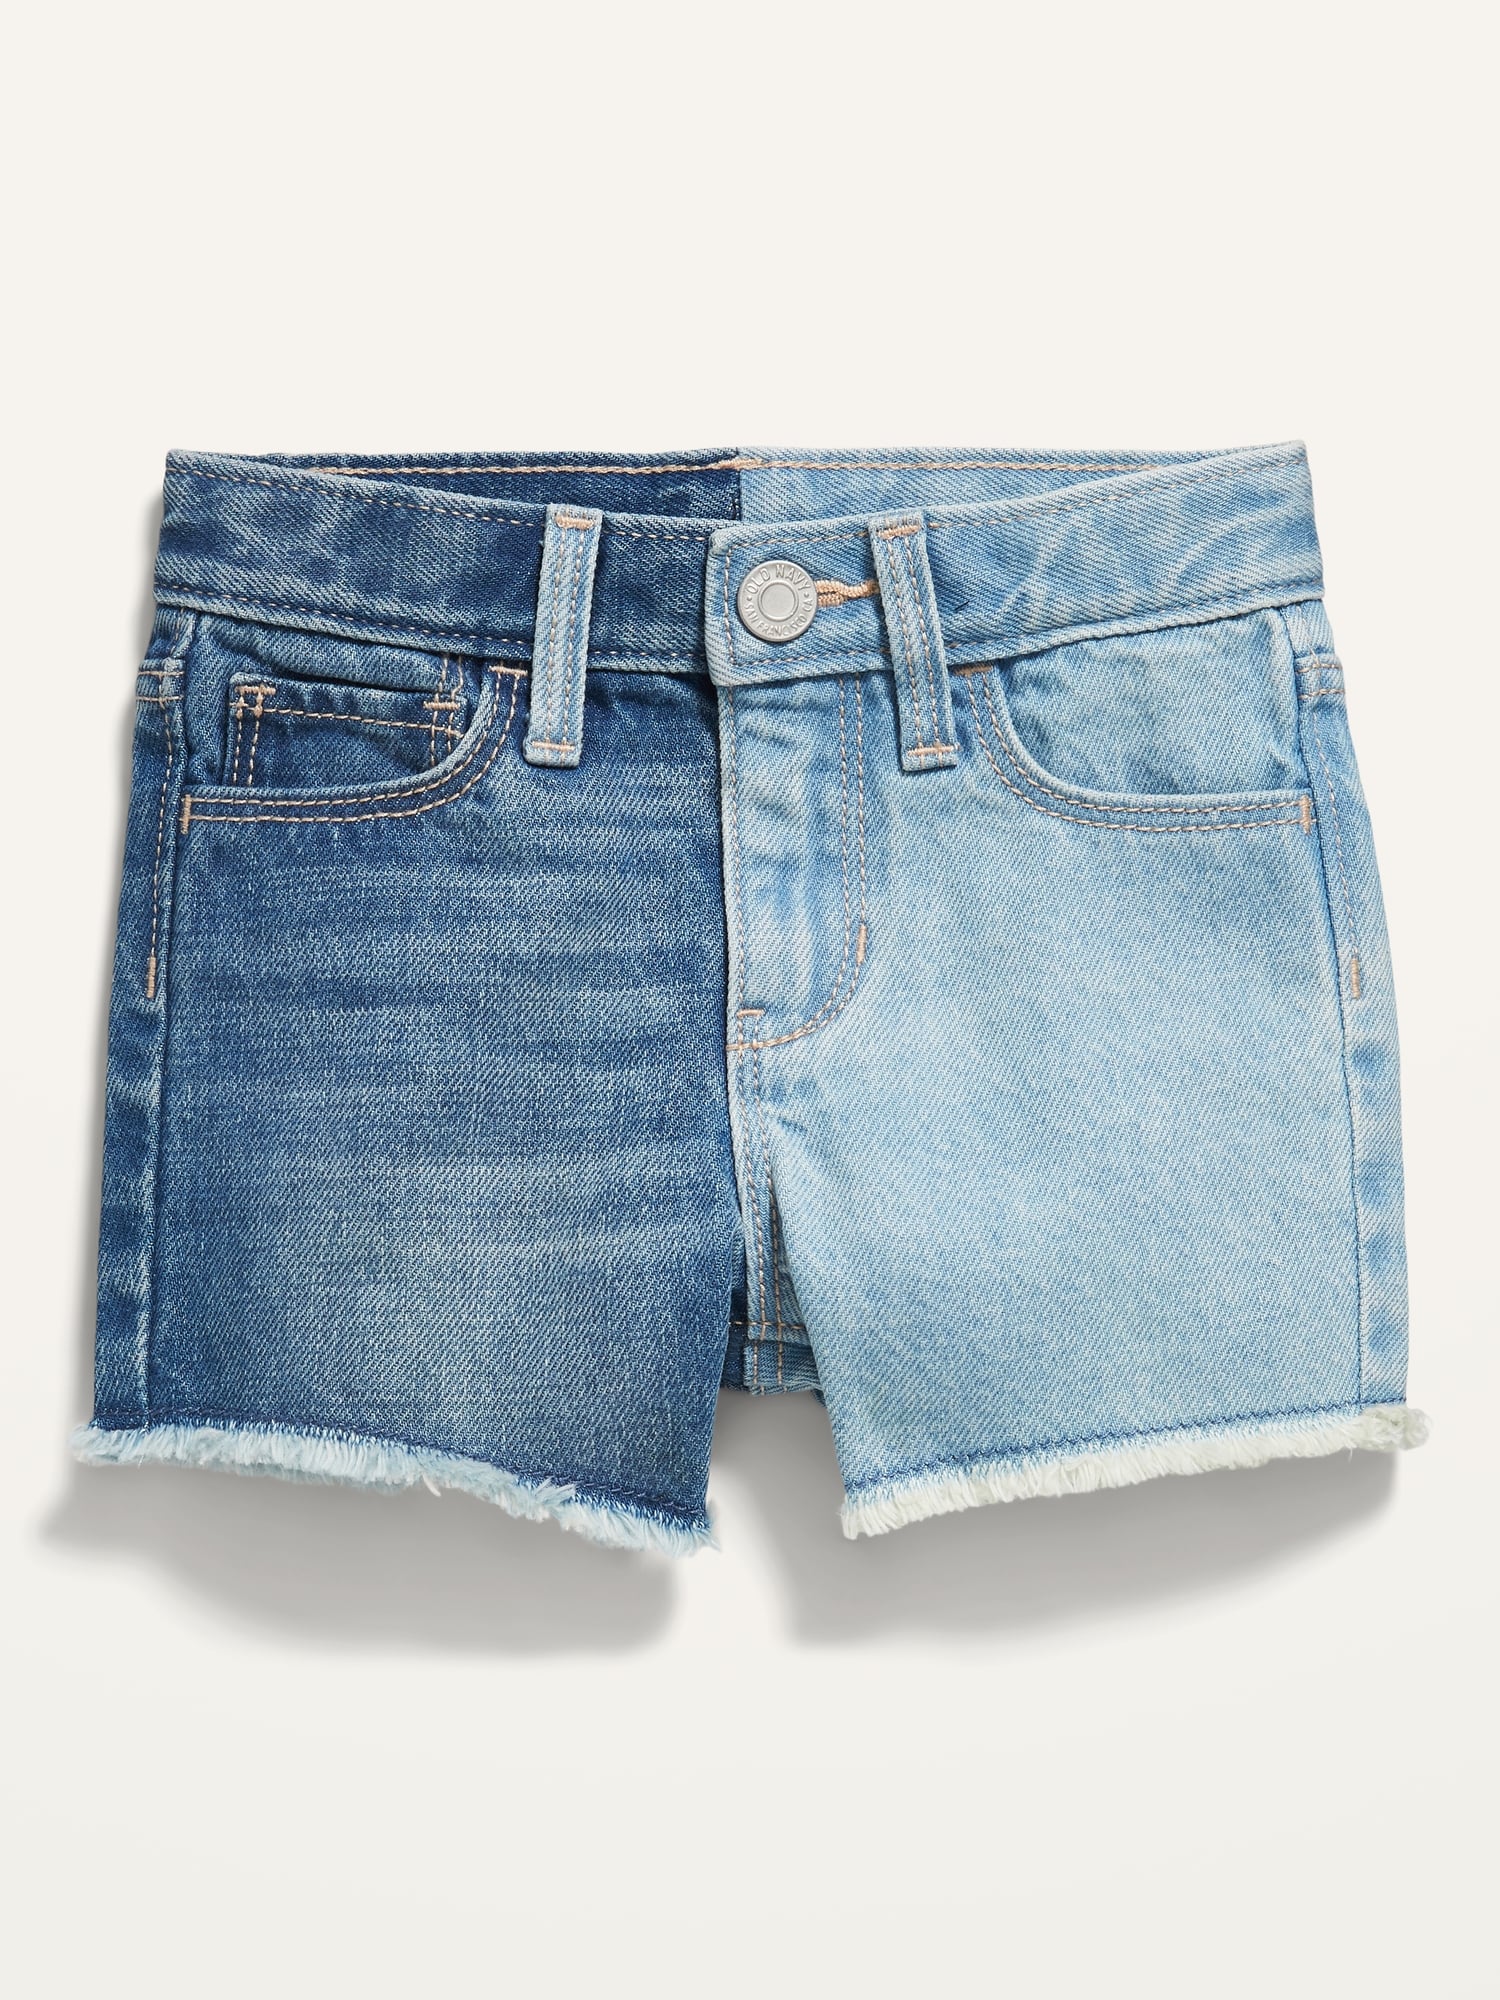 High-Waisted Cut-Off Jean Shorts for Toddler Girls | Old Navy